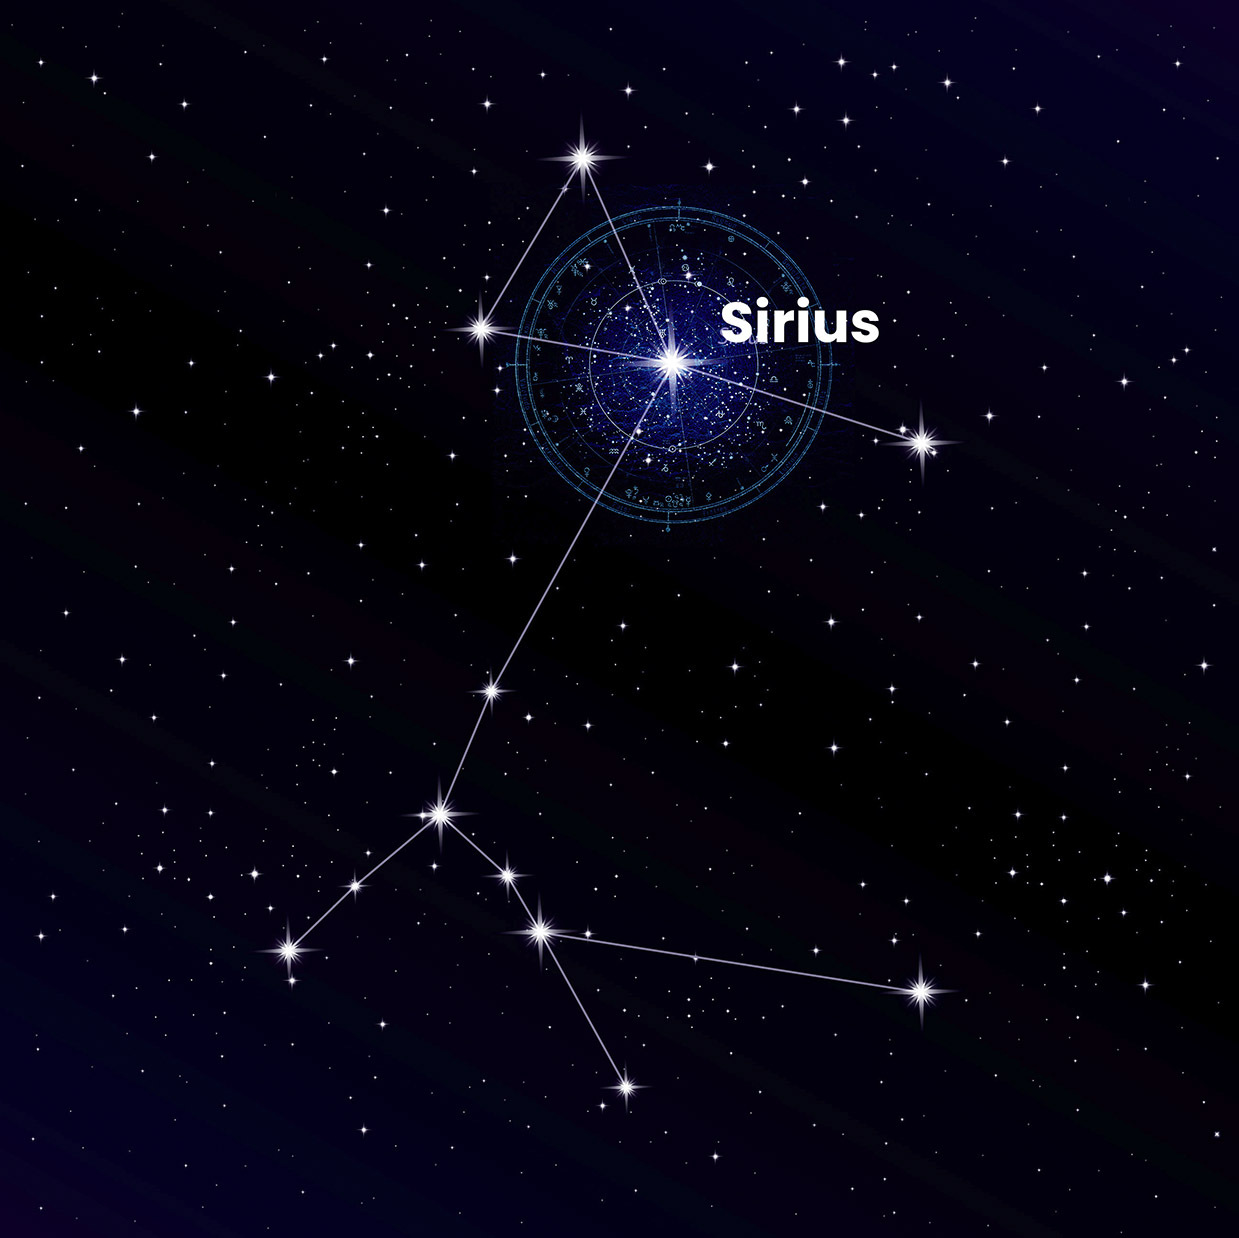 Canis Major Constellation with Sirius Star